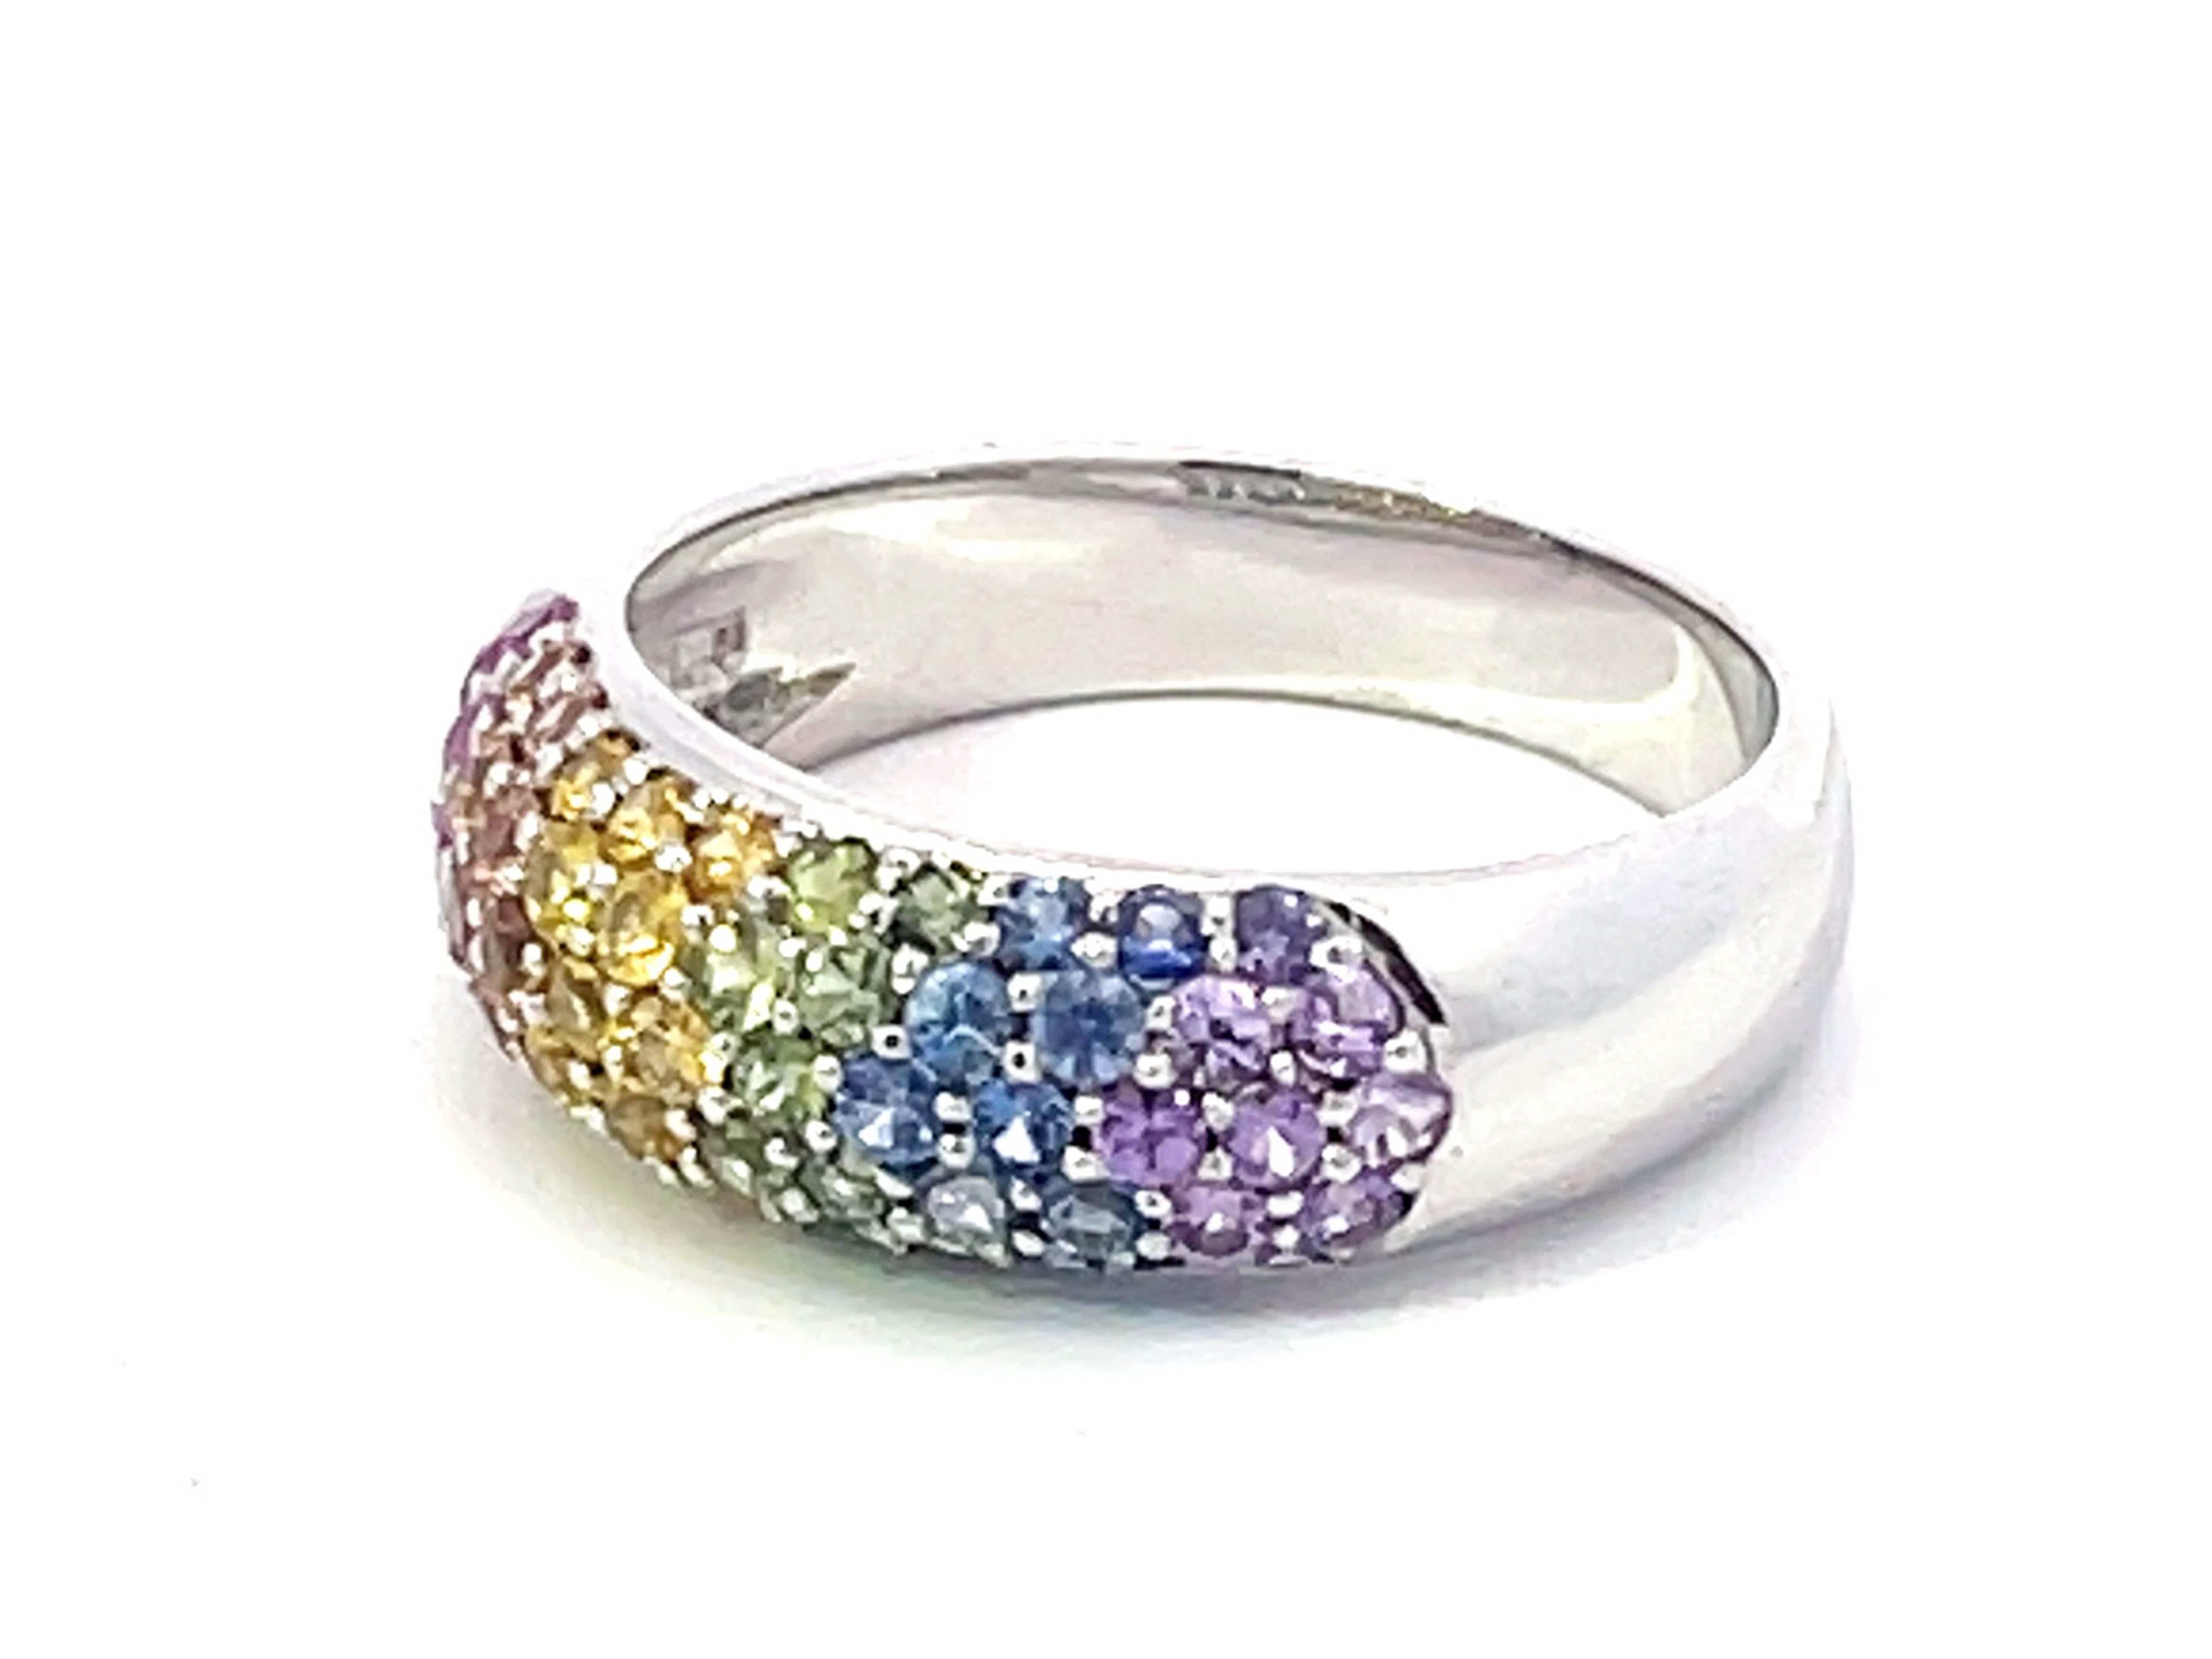 Multi Colored Sapphire Dome Ring in 18K White Gold In Excellent Condition For Sale In Honolulu, HI